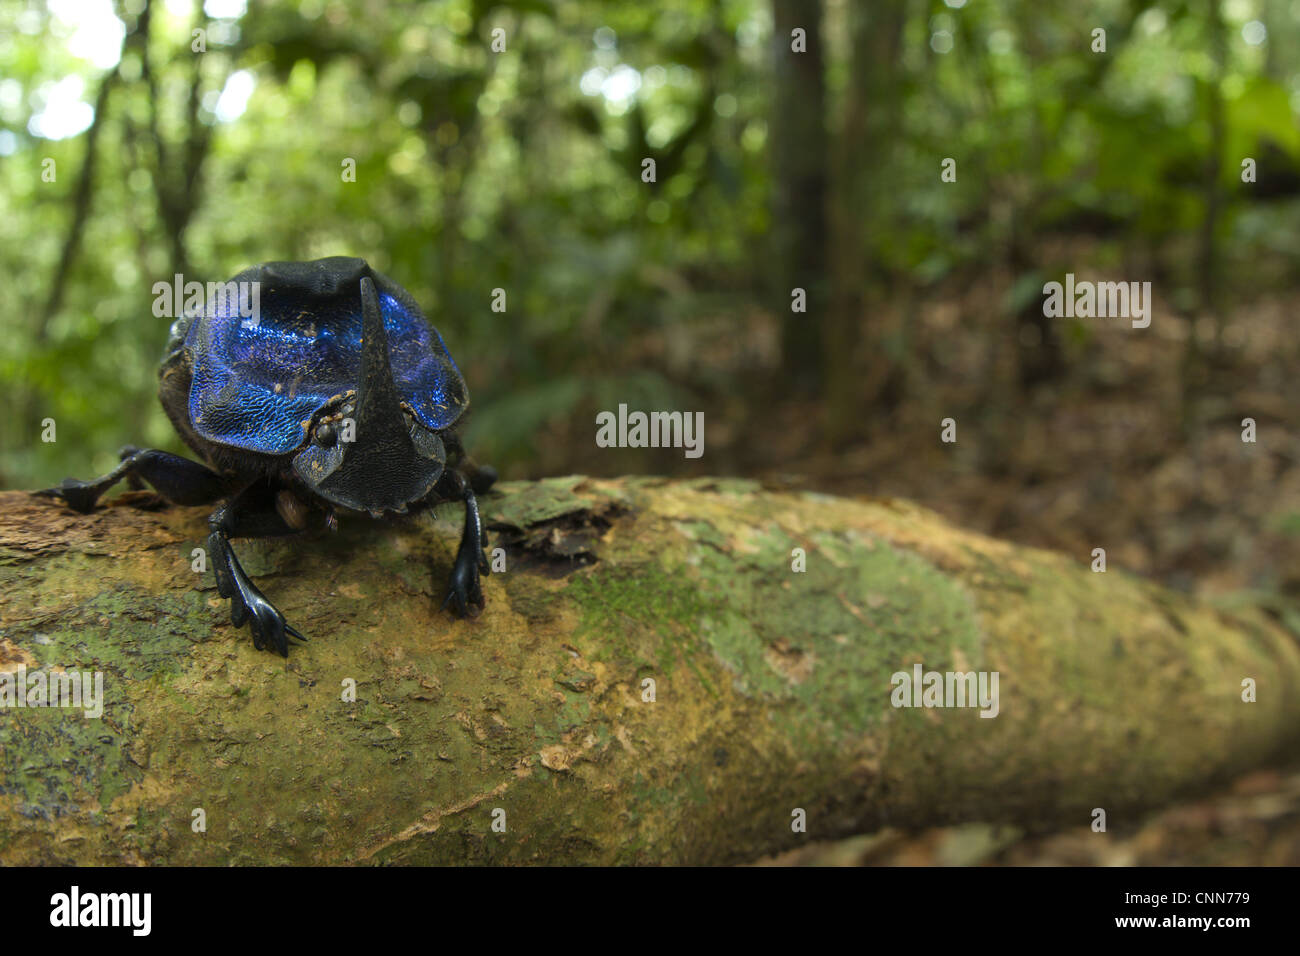 Dung Beetle Scarabaeidae sp. adult branch tropical forest habitat Los Amigos Biological Station Madre de Dios Amazonia Peru Stock Photo